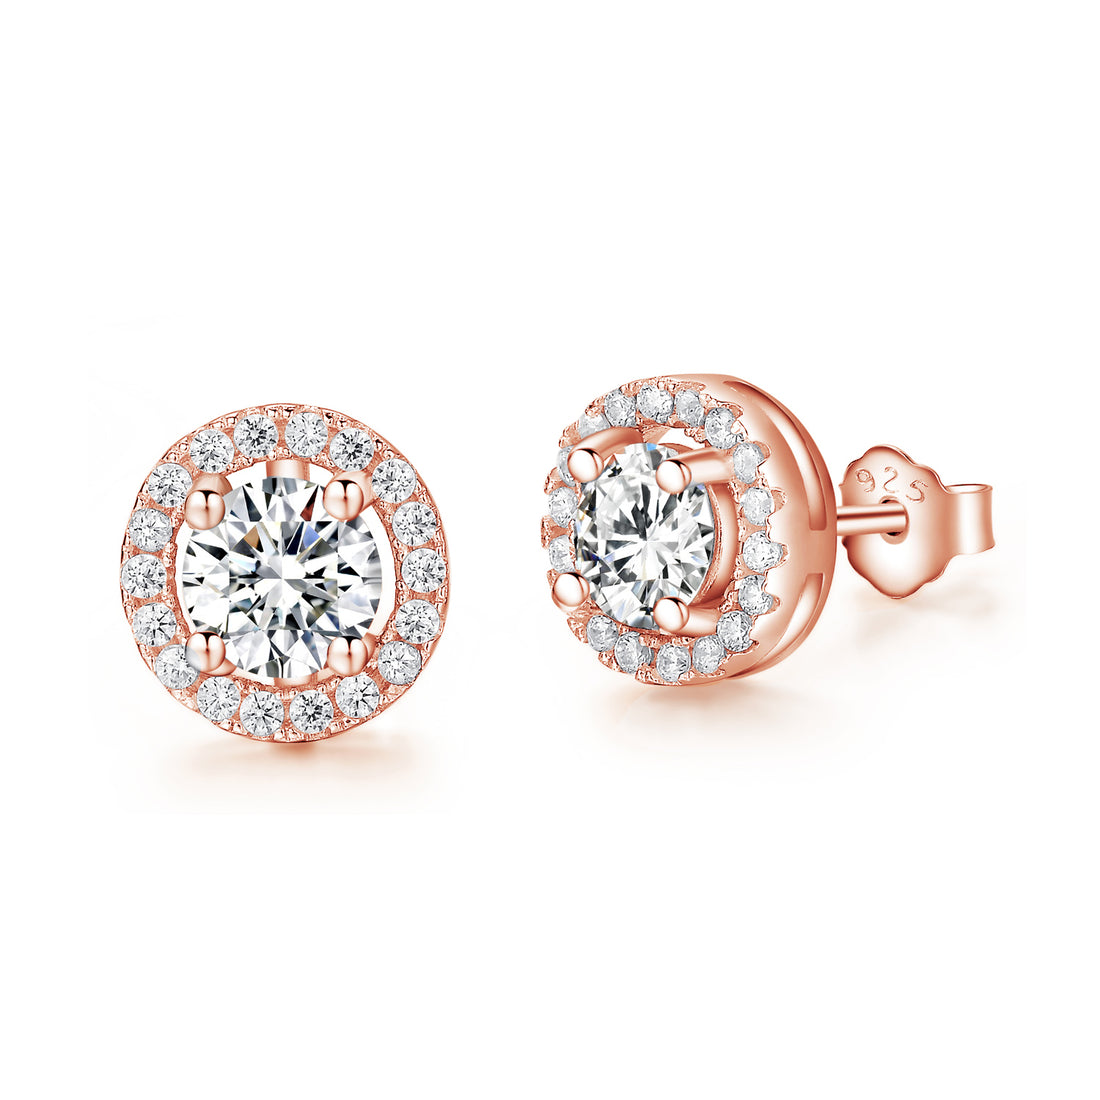 Rose gold stud earrings with a solo centre cubic zirconia stone surrounded by tiny sparking stones.